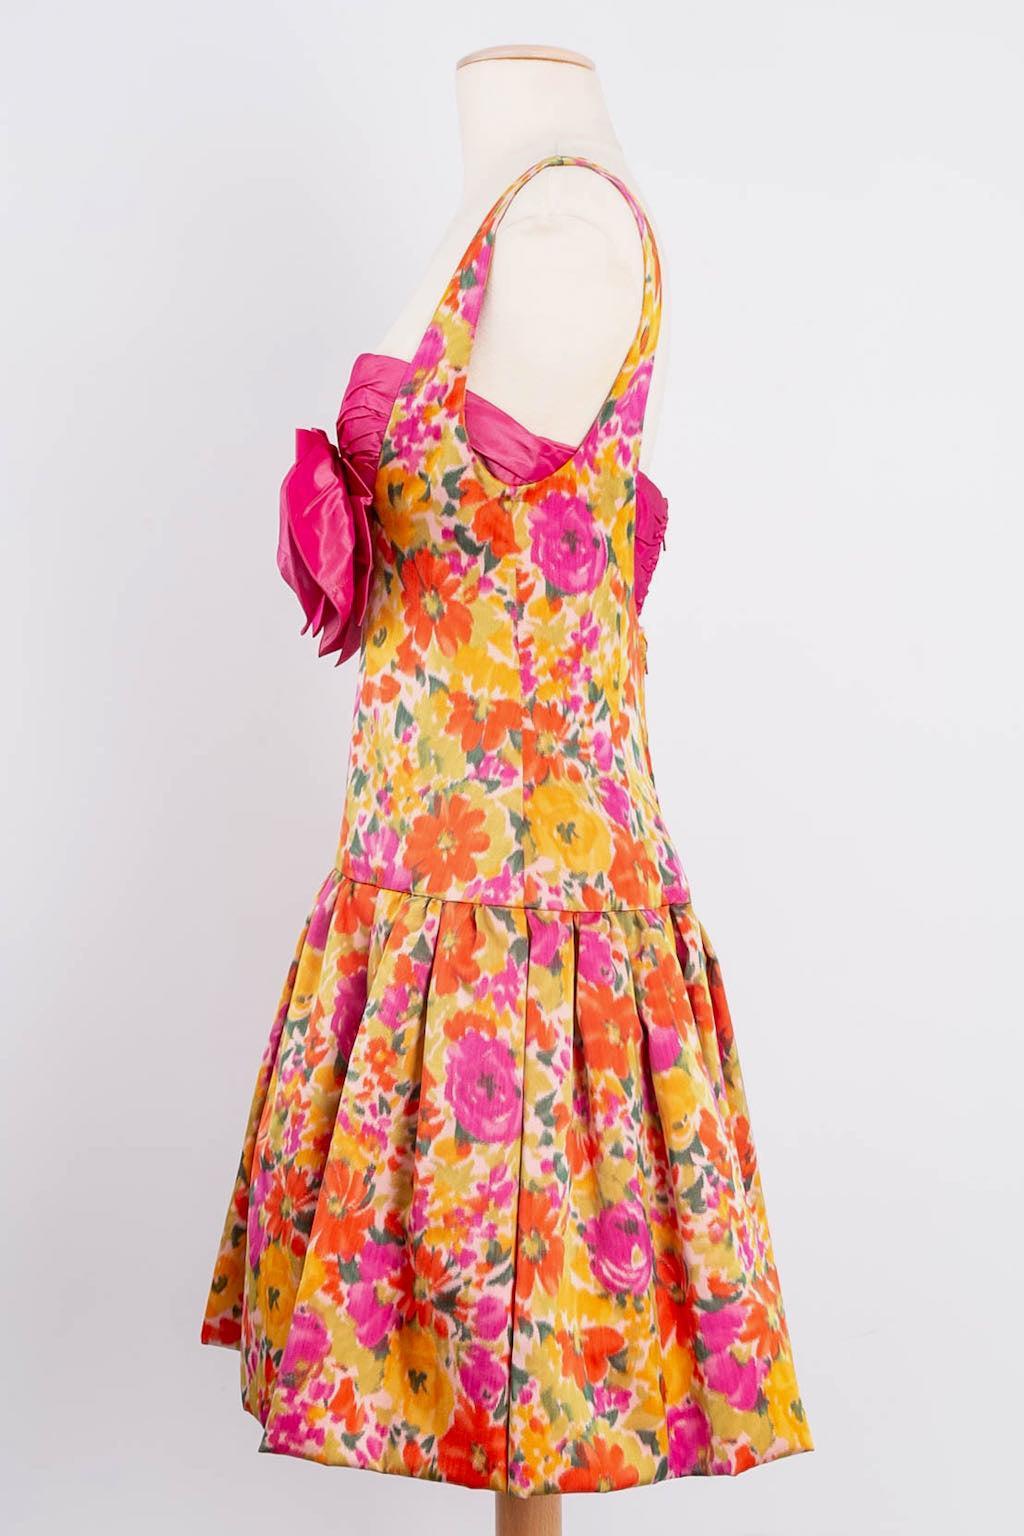 Nina Ricci Flower Silk Dress and its Stole For Sale 1